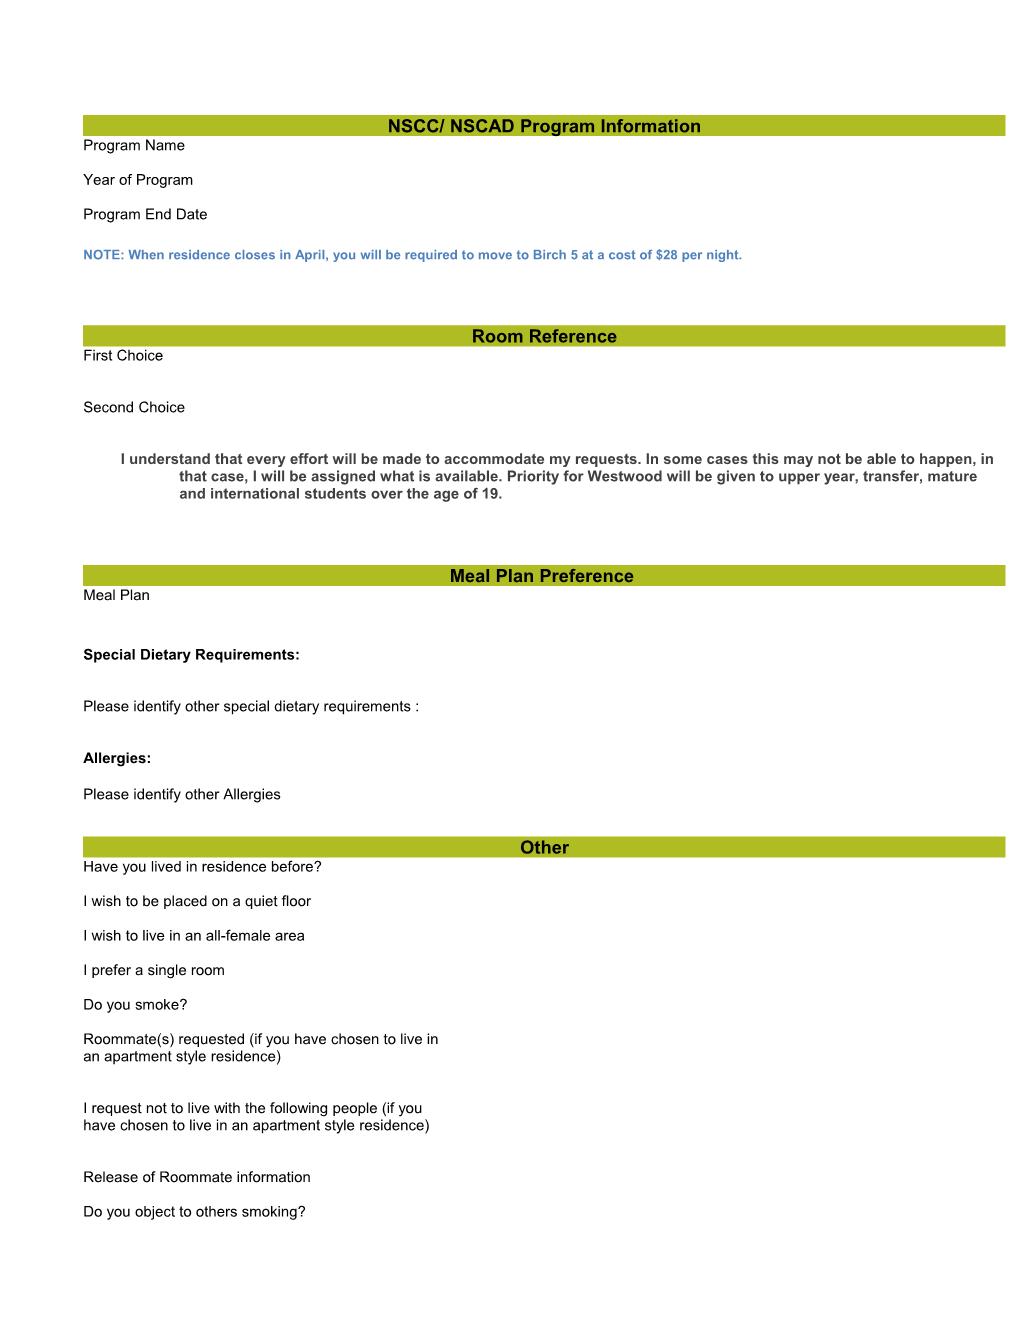 Employee Information Form s1